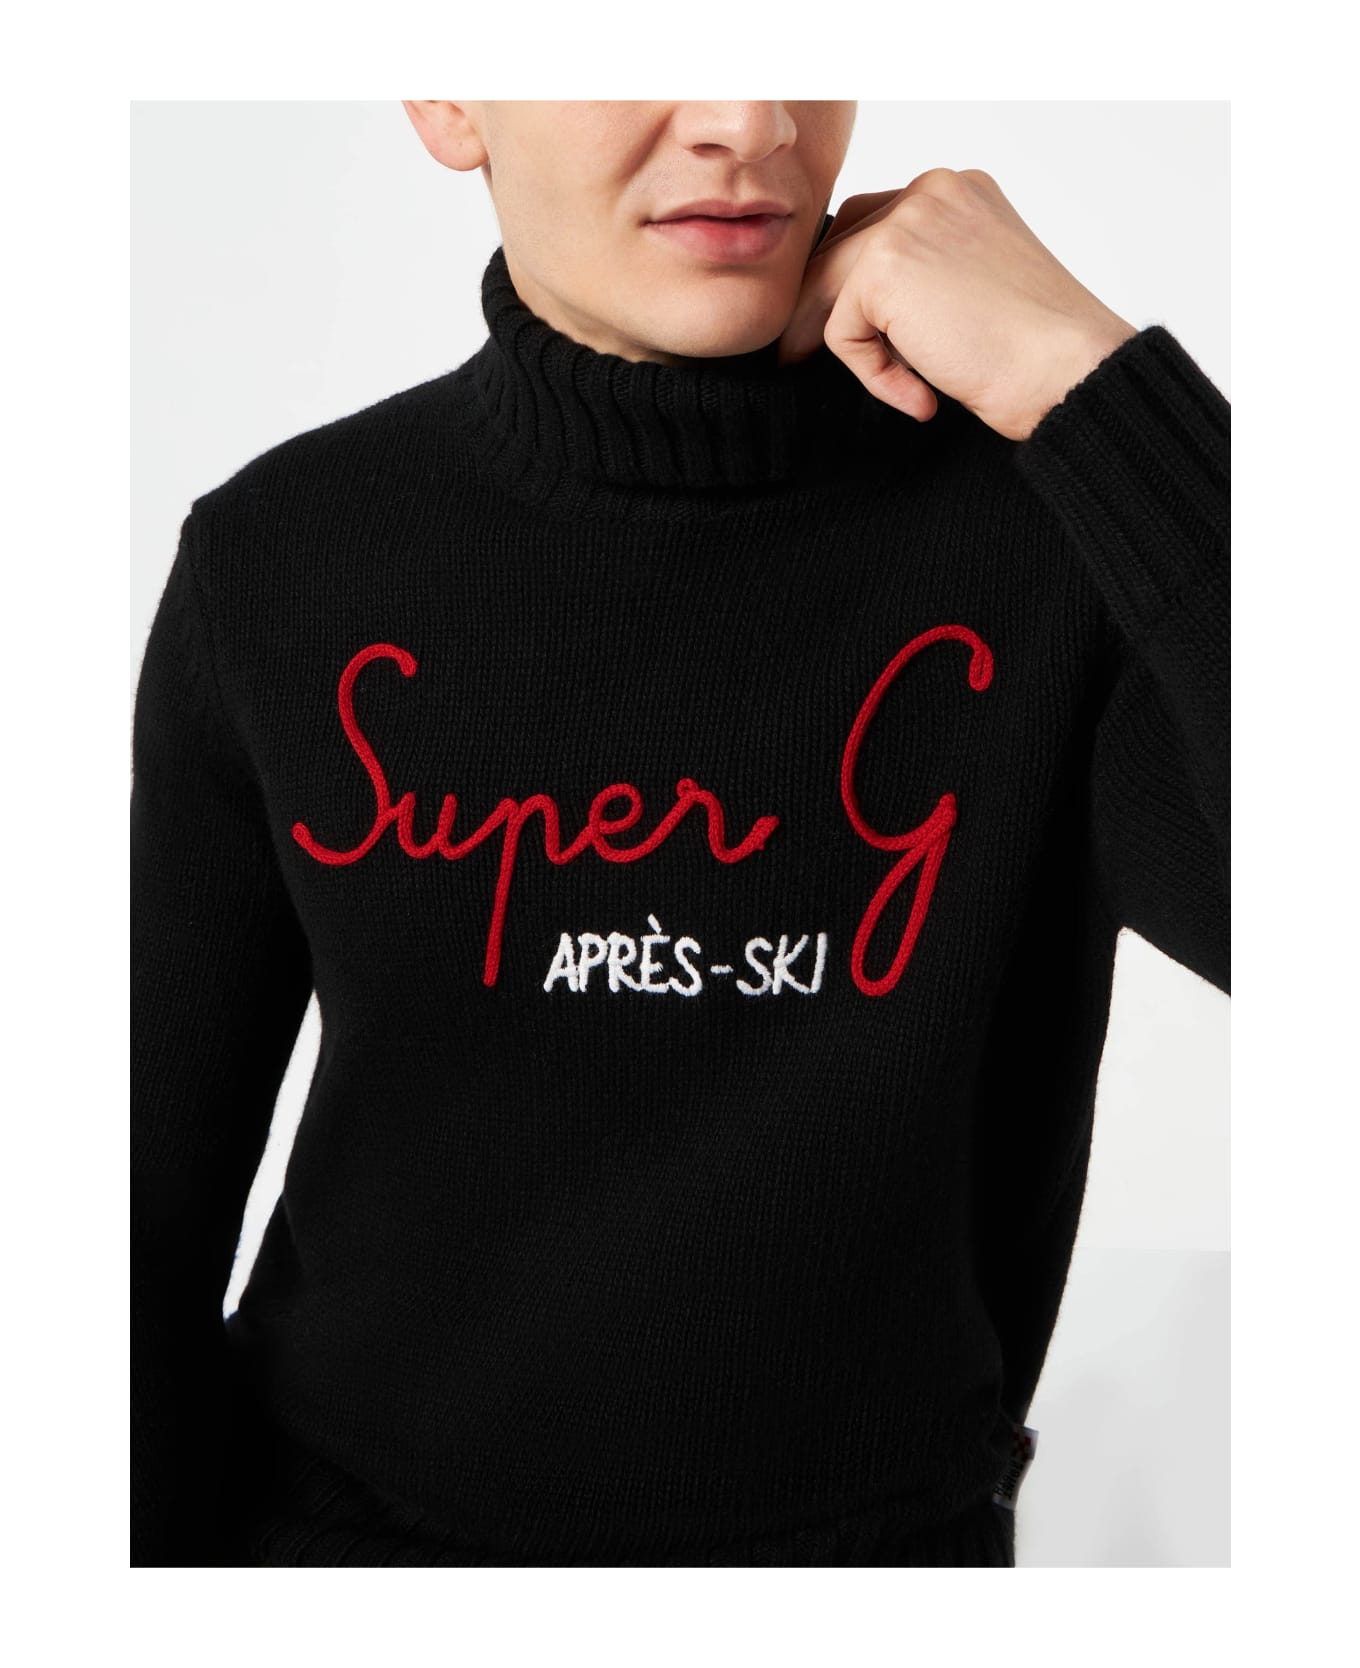 MC2 Saint Barth Man High Neck Sweater With Super G Embroidery | Super G Special Edition - BLACK